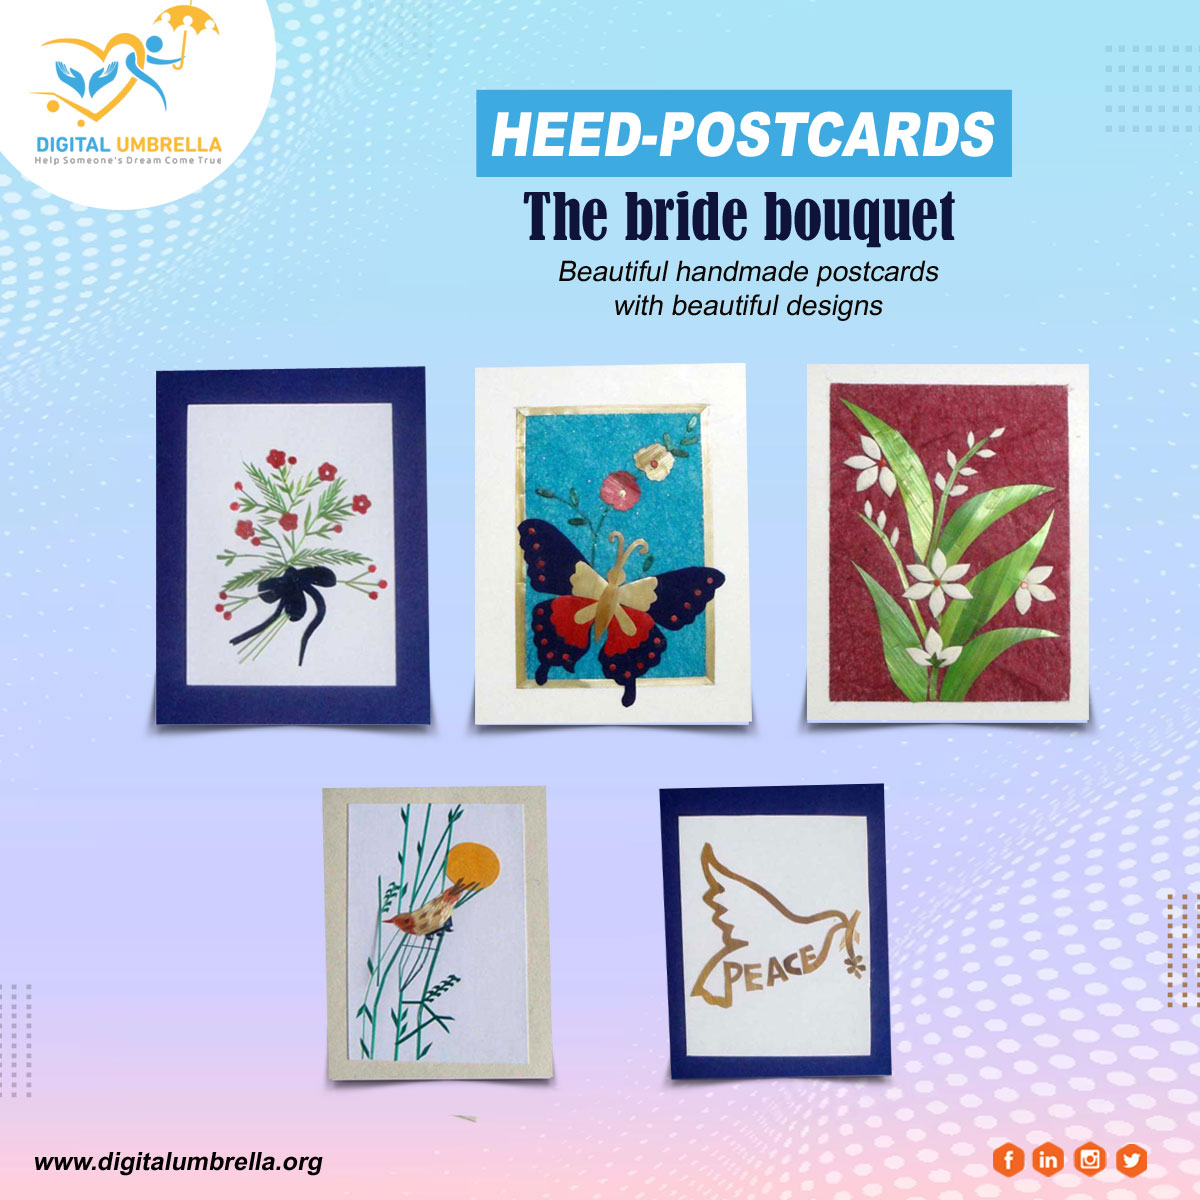 Sending love, thoughts, and inspiration has never been more beautiful. Introducing our exquisite designer postcards, crafted with care and creativity. 

#DesignerPostcards #ArtisticGreetings #CreativeCards  #GreetingCardArt  #HandcraftedPostcards #SendingLove #PostcardMagic